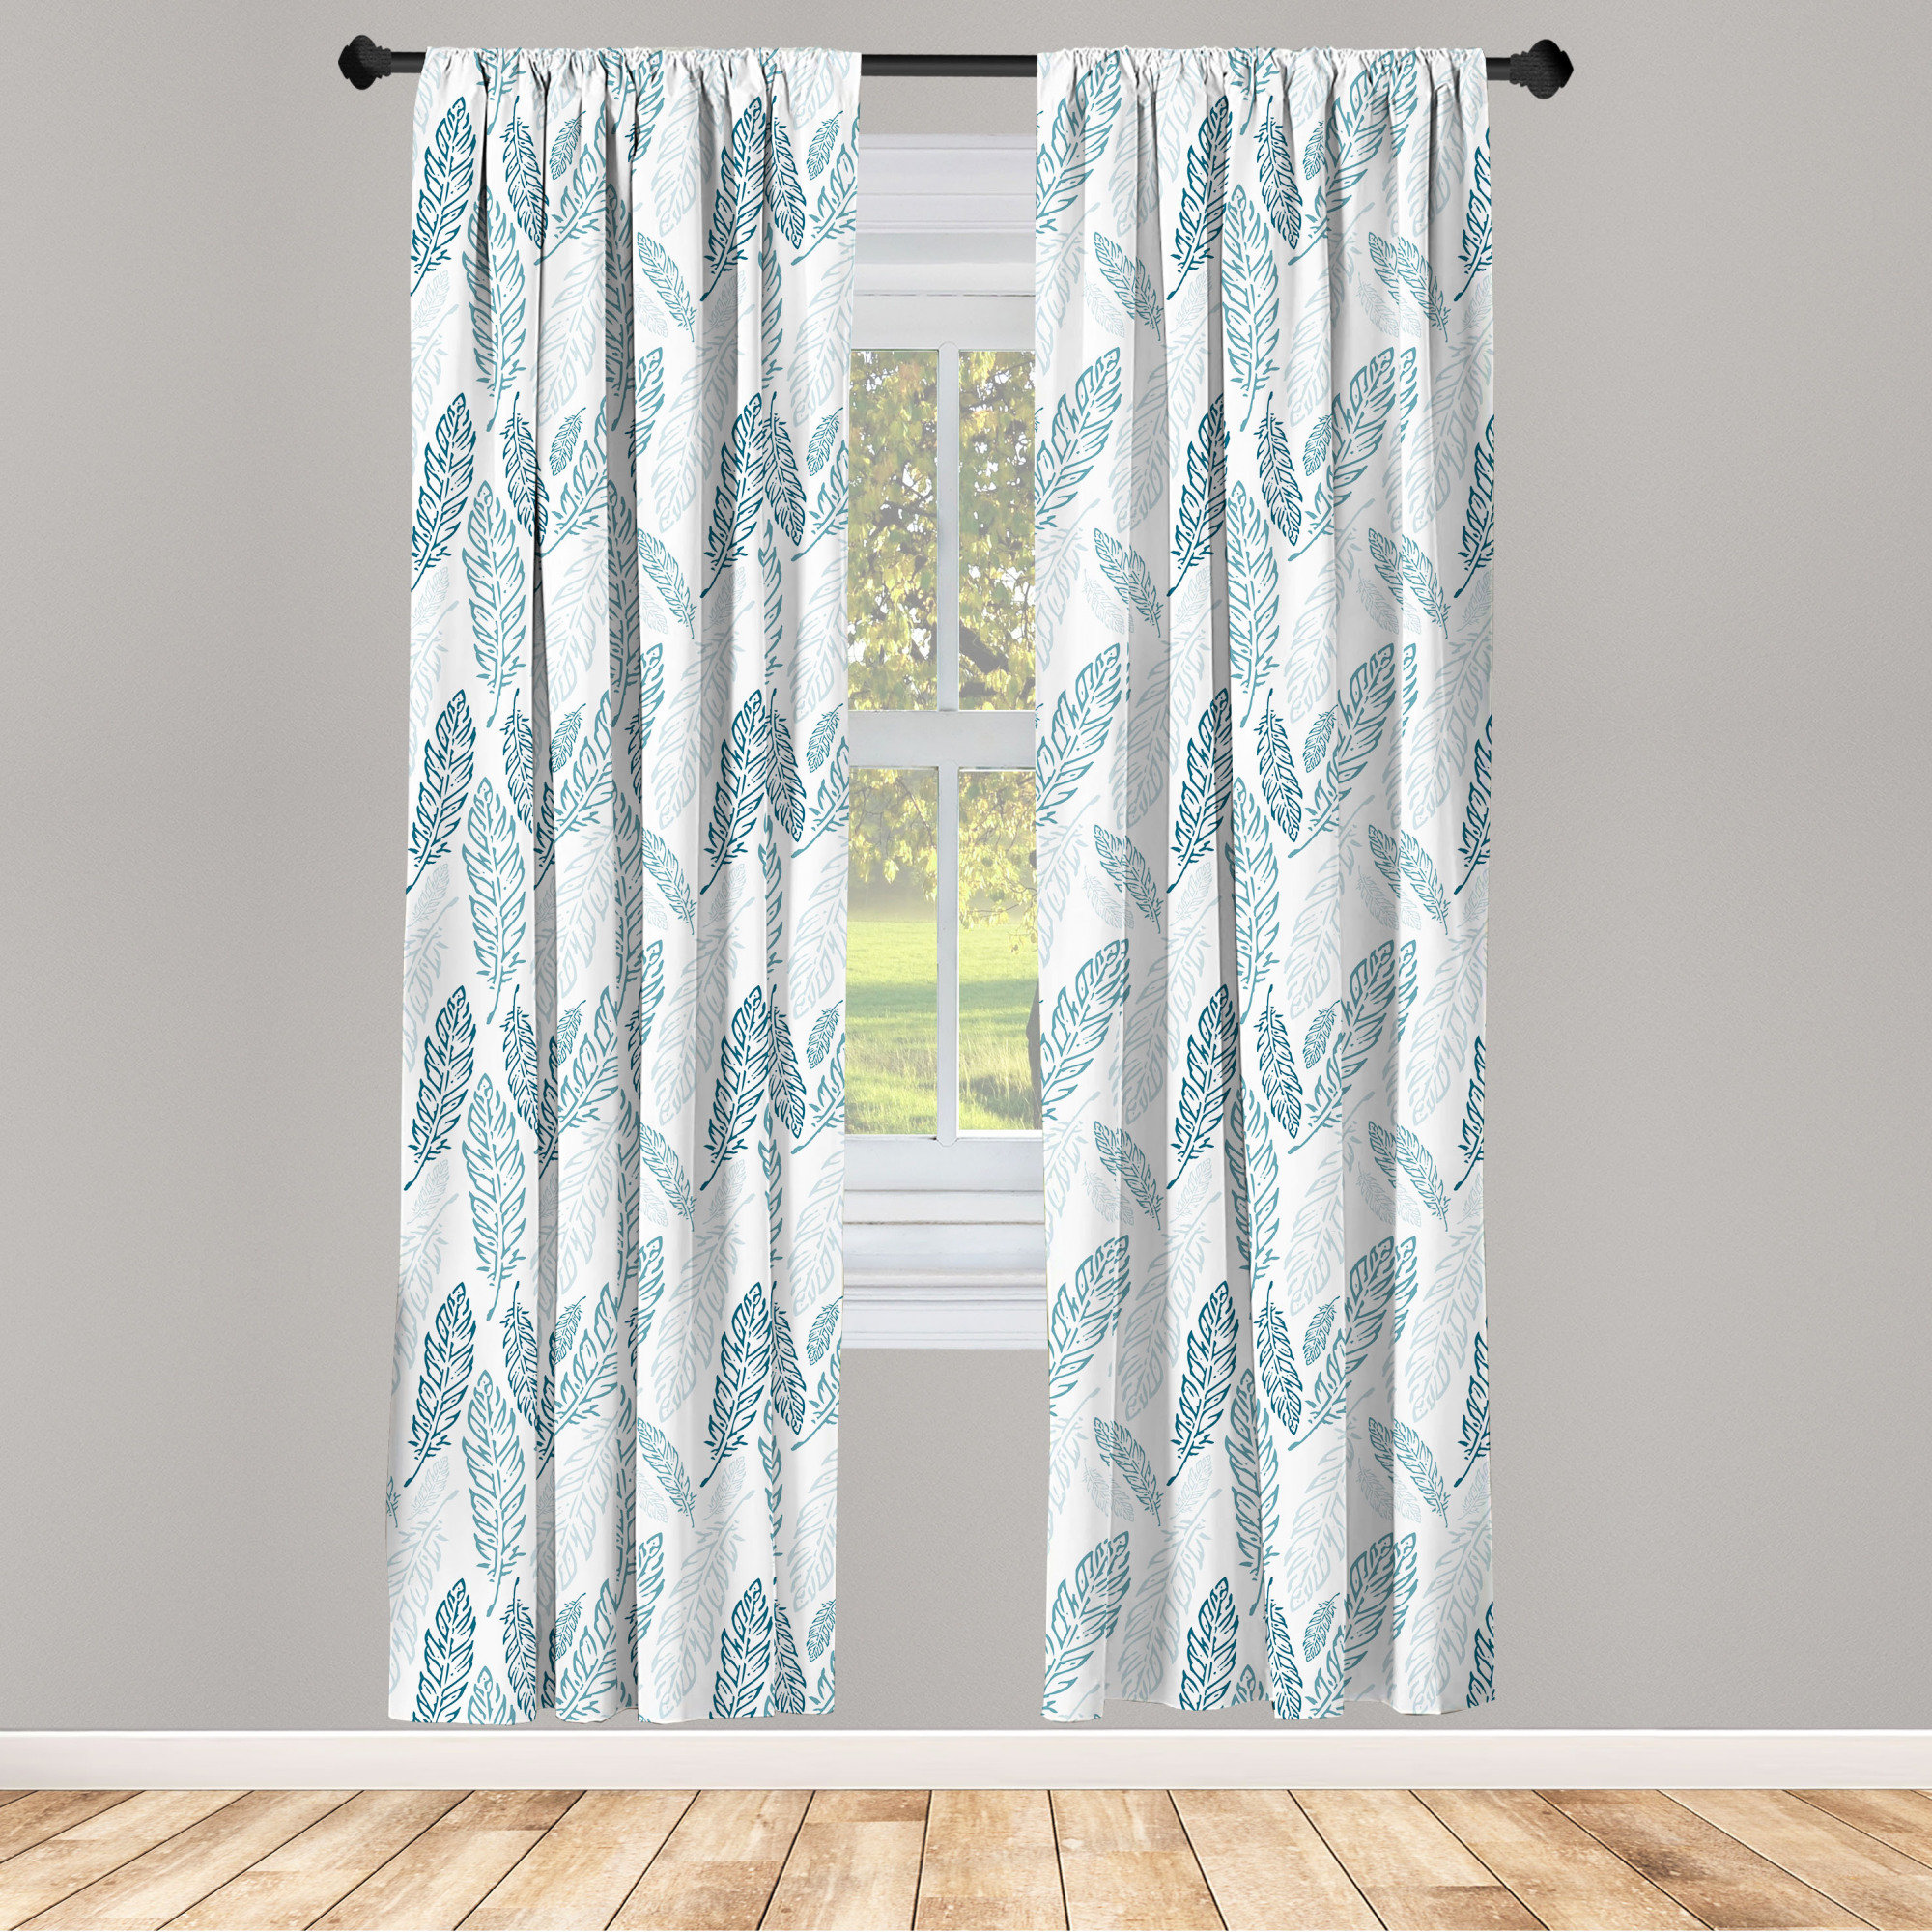 Ambesonne Room Microfiber Curtain Panels Set of 2 Window Drapes with Rod Pocket 